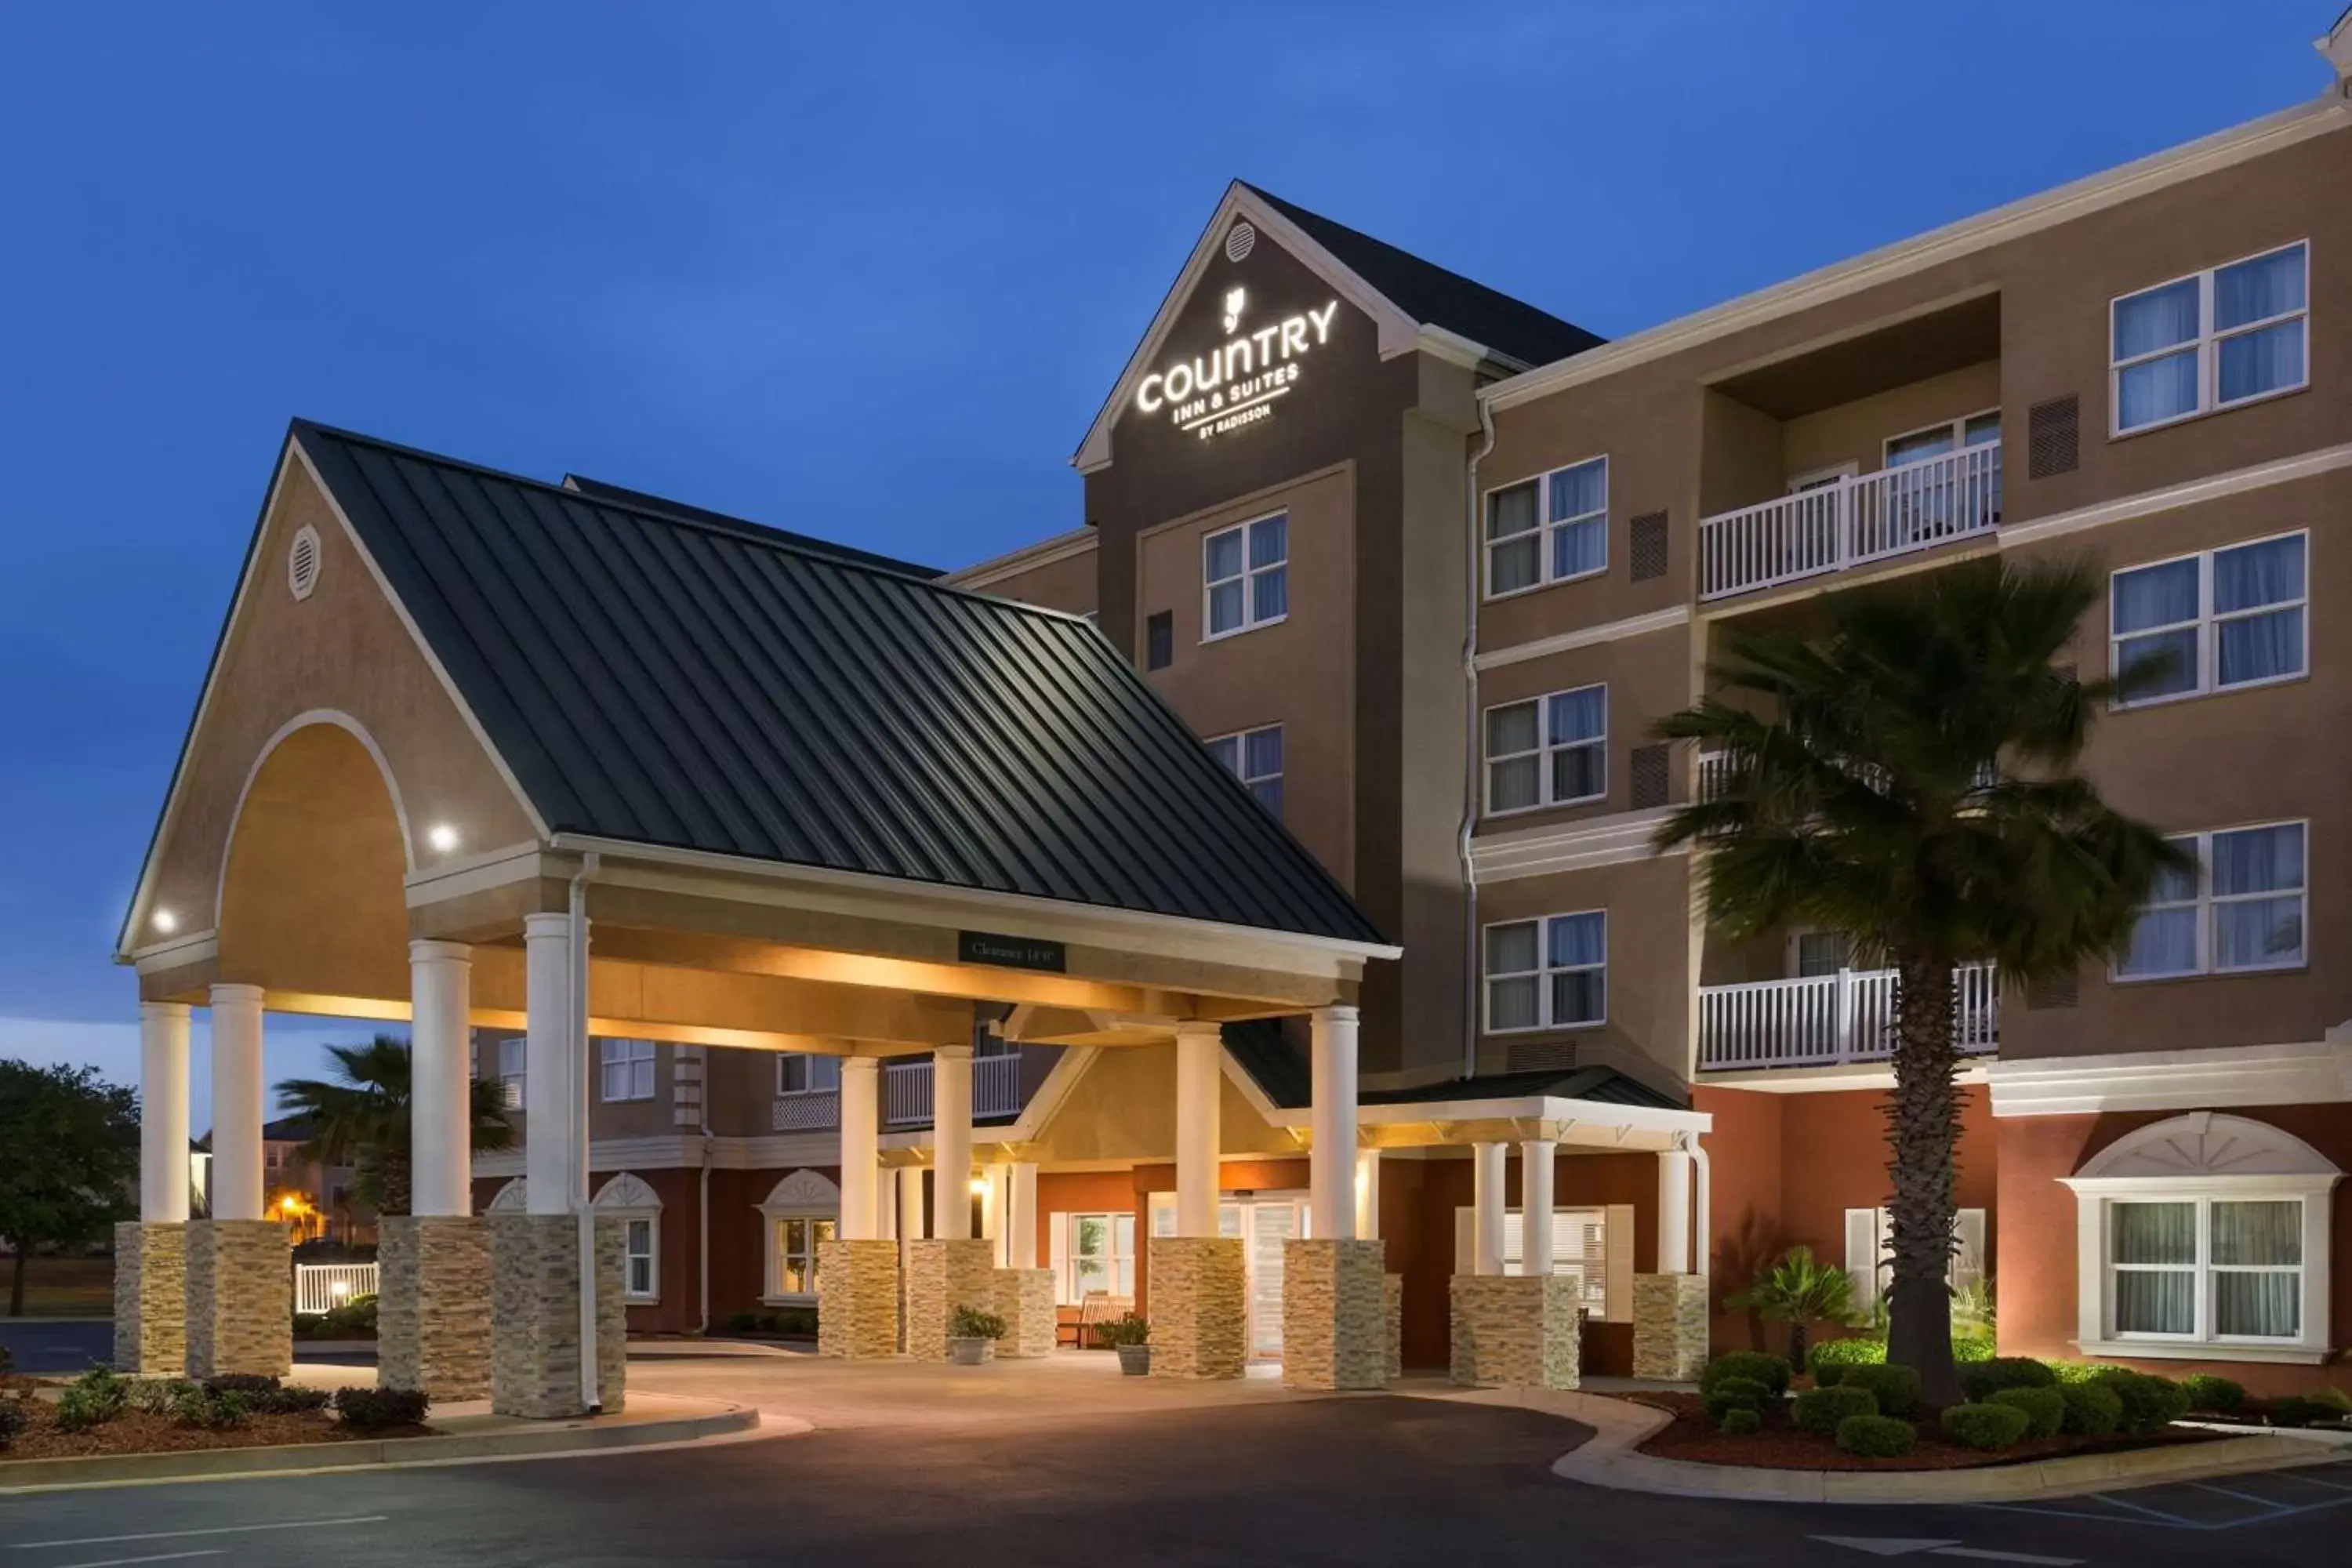 Property building in Country Inn & Suites by Radisson, Panama City Beach, FL